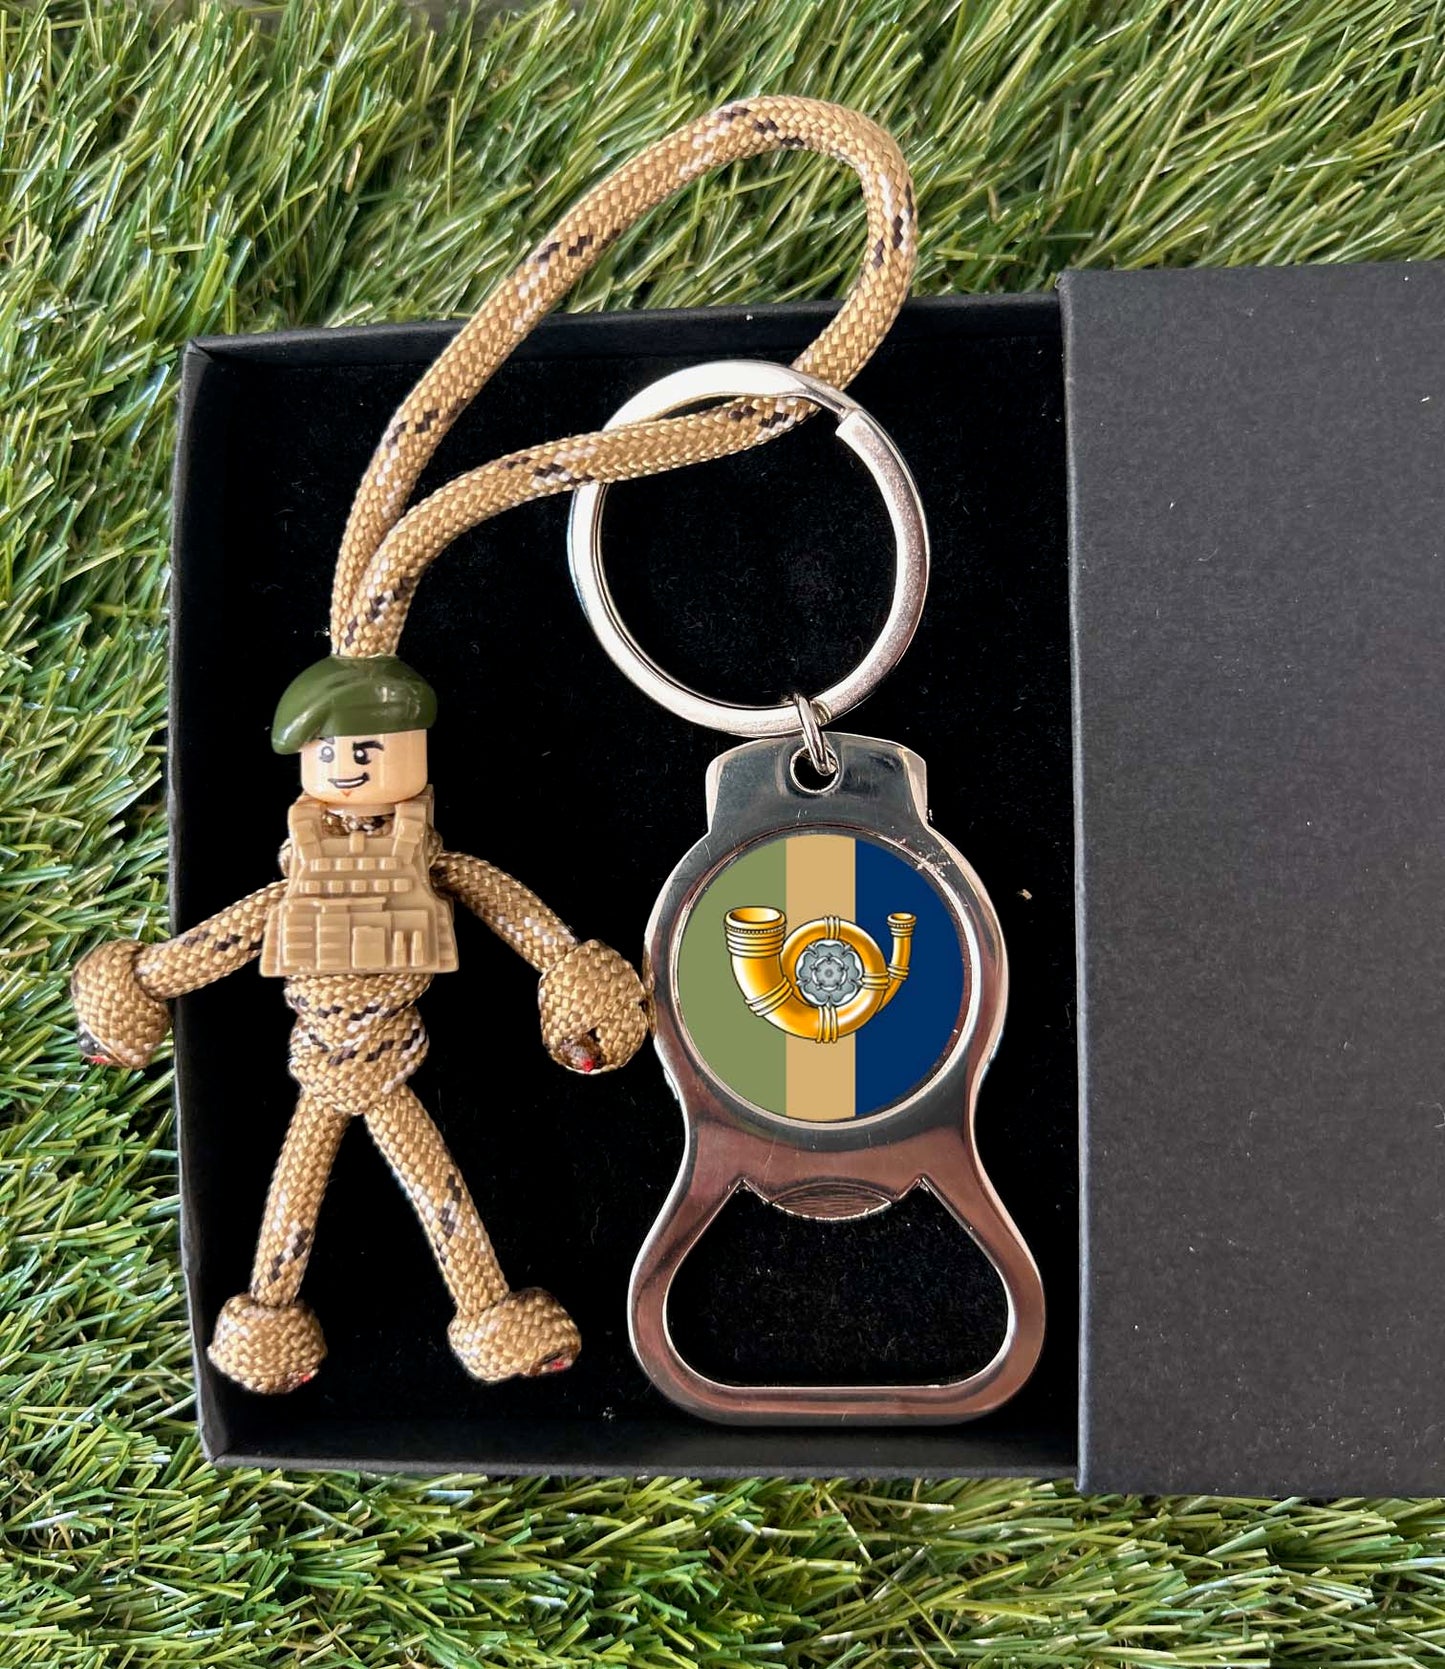 King's Own Yorkshire Light Infantry - pBuddies' Paracord Keychains and Key Ring Bottle Opener